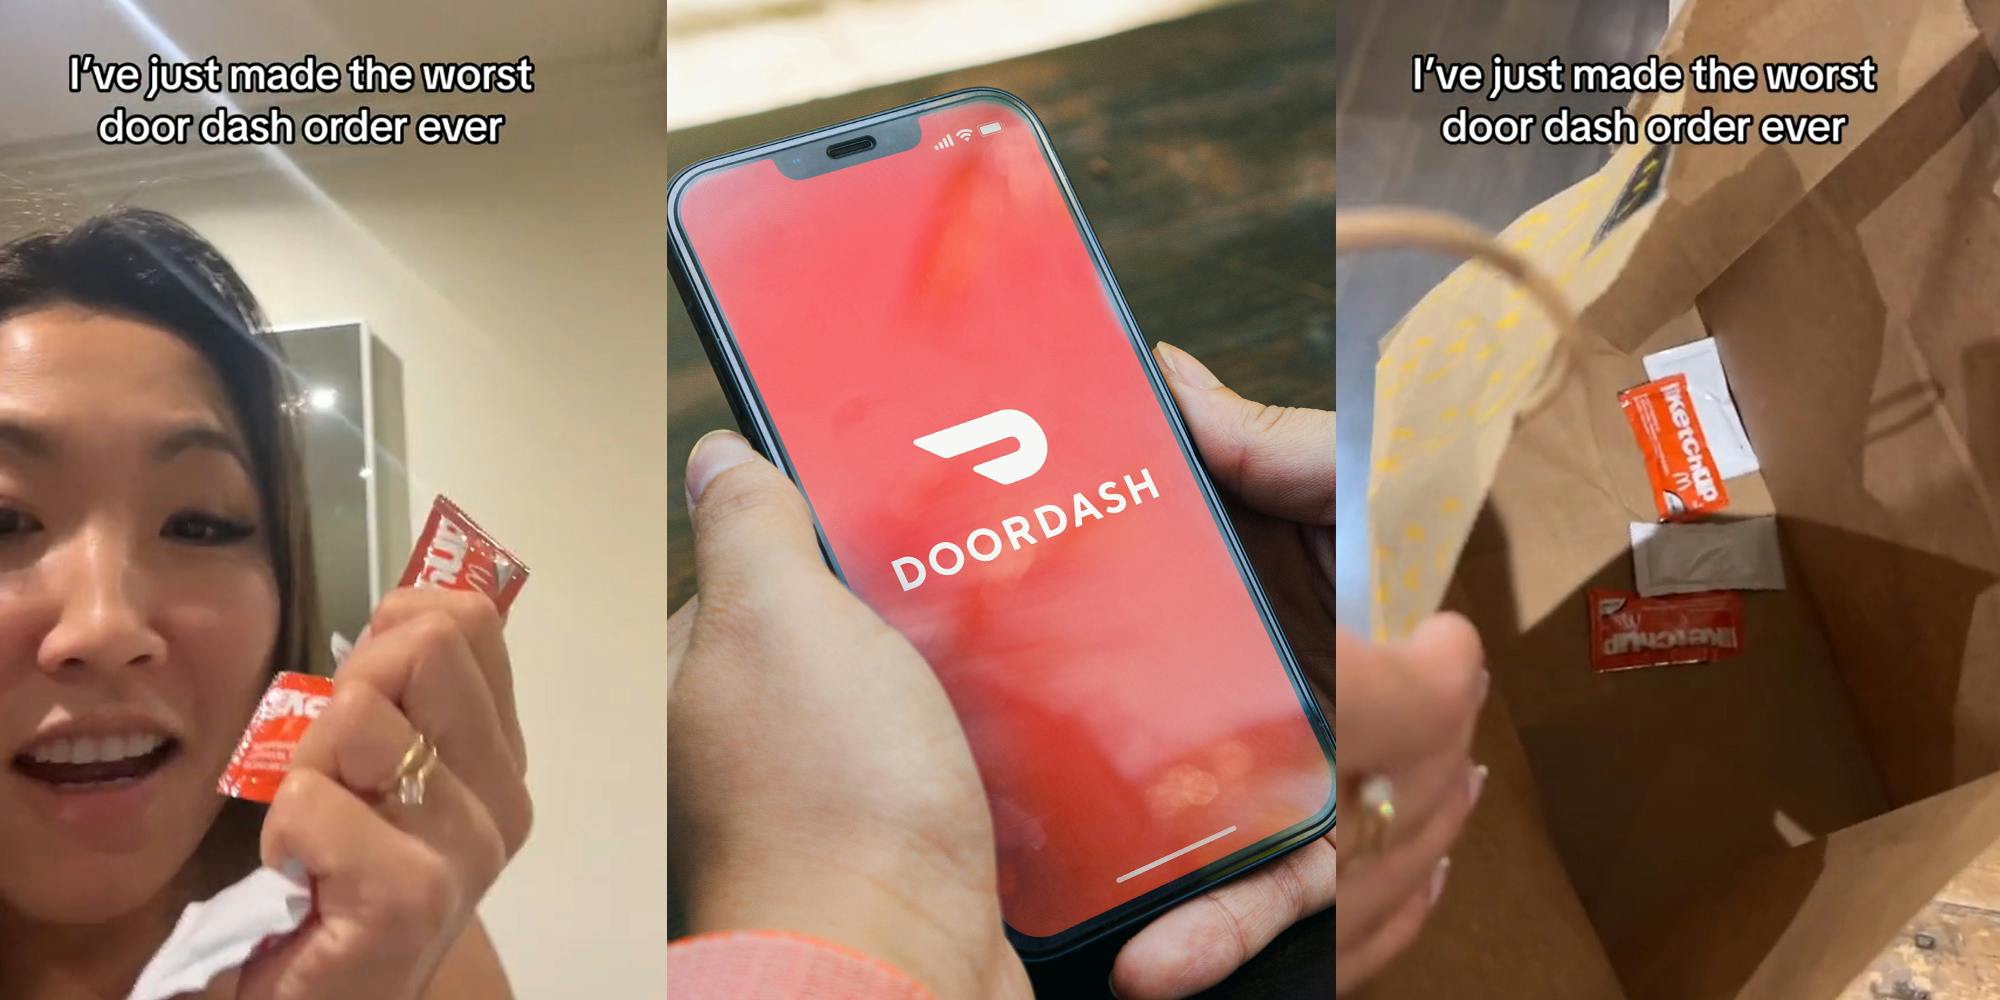 DoorDash customer speaking holding ketchup packets with caption "I've just made the worst door dash order ever" (l) DoorDash on phone screen in hands in front of wooden background (c) DoorDash customer opening bag to reveal ketchup packets with caption "I've just made the worst door dash order ever" (r)